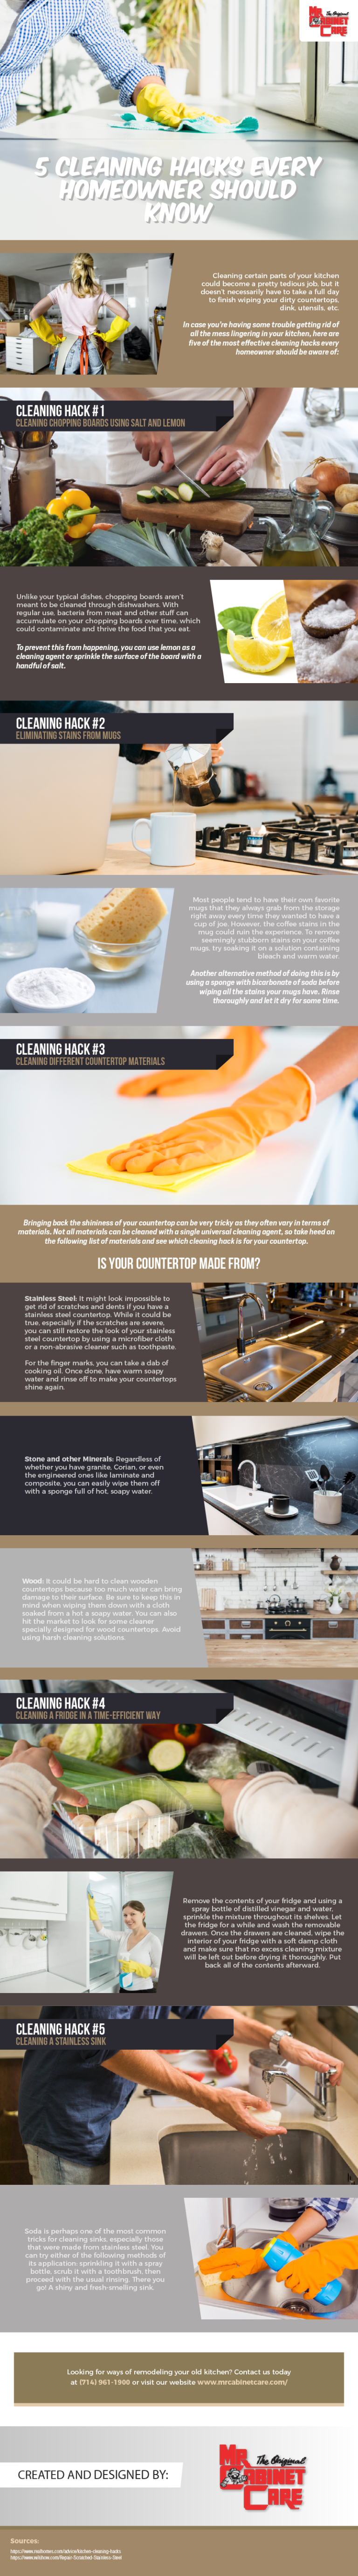 5_Cleaning_Hacks_Every_Homeowner_Should_Know_infographic_image